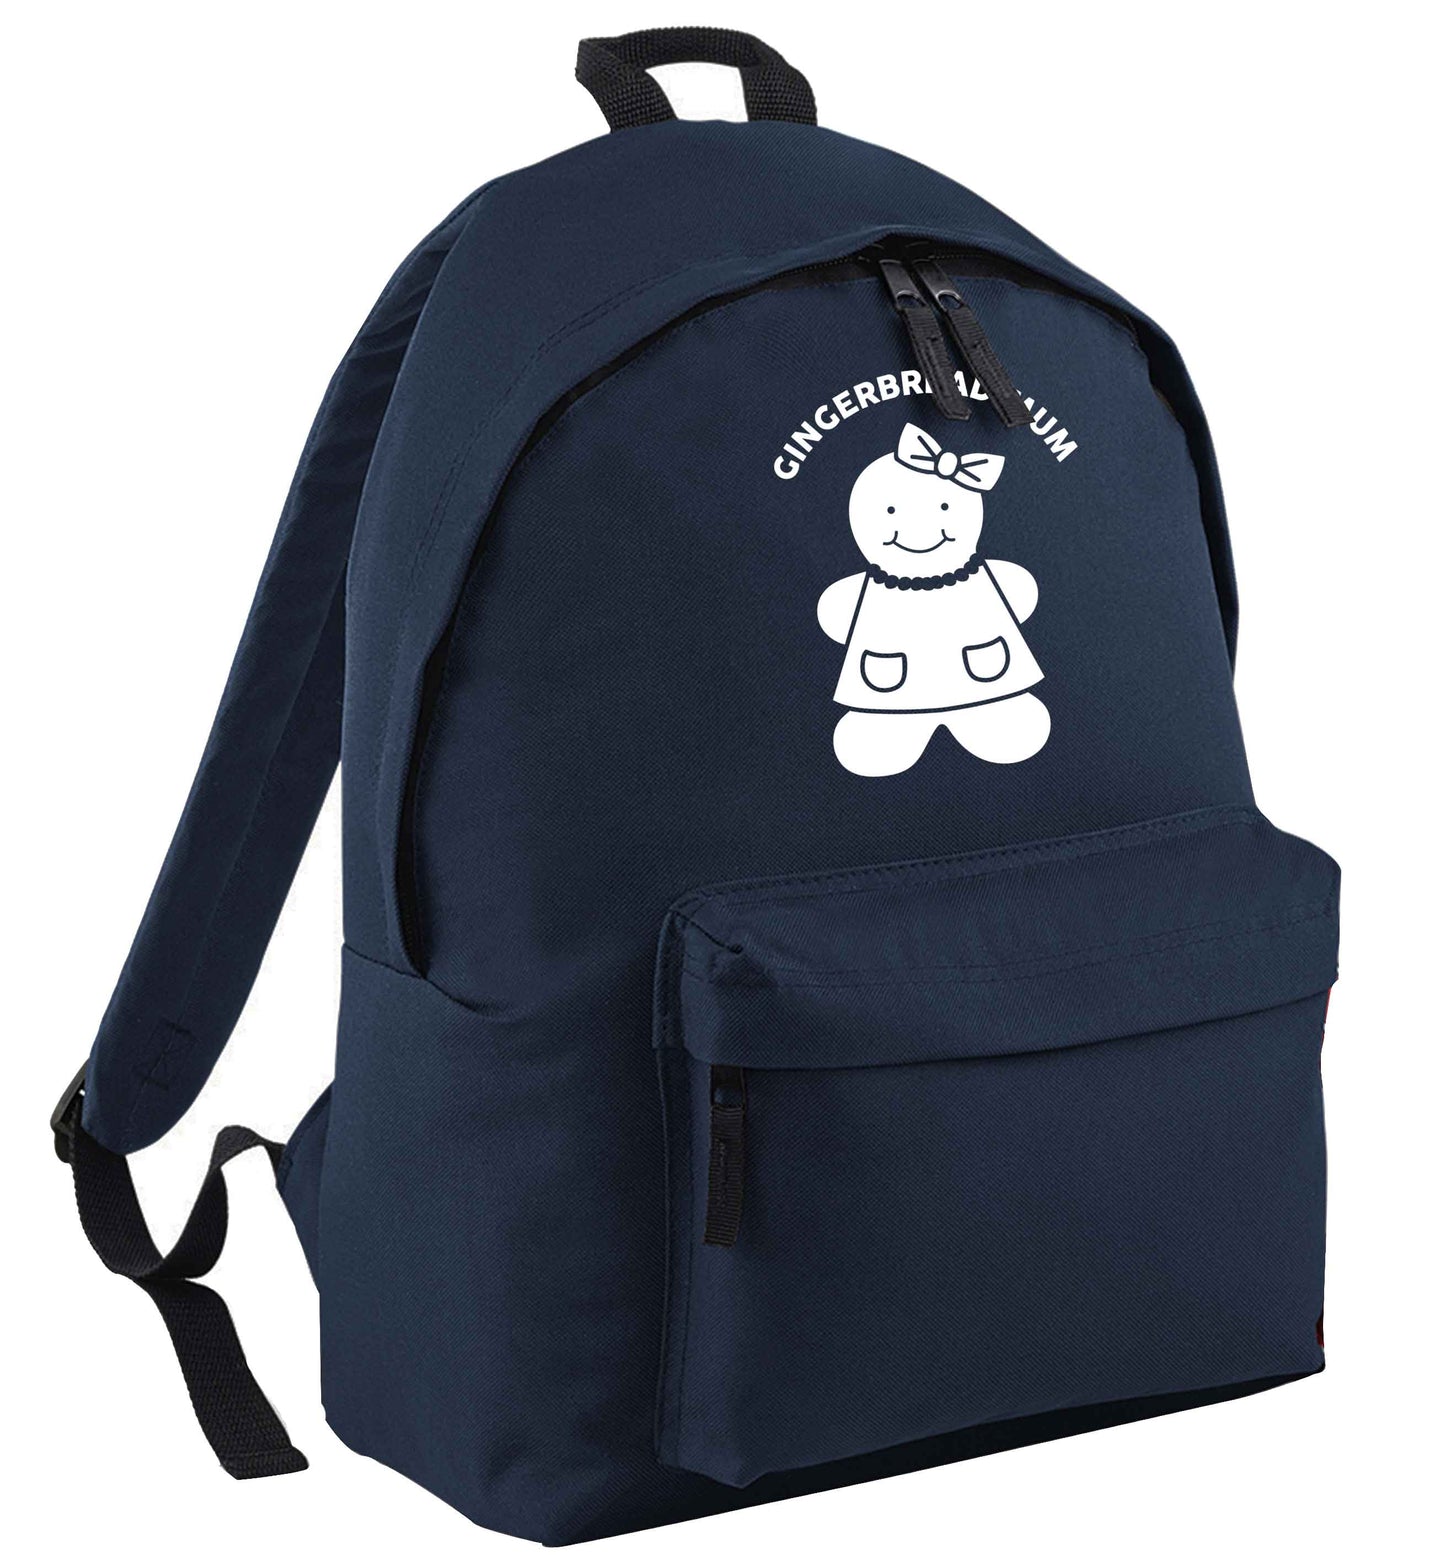 Merry Christmas navy adults backpack